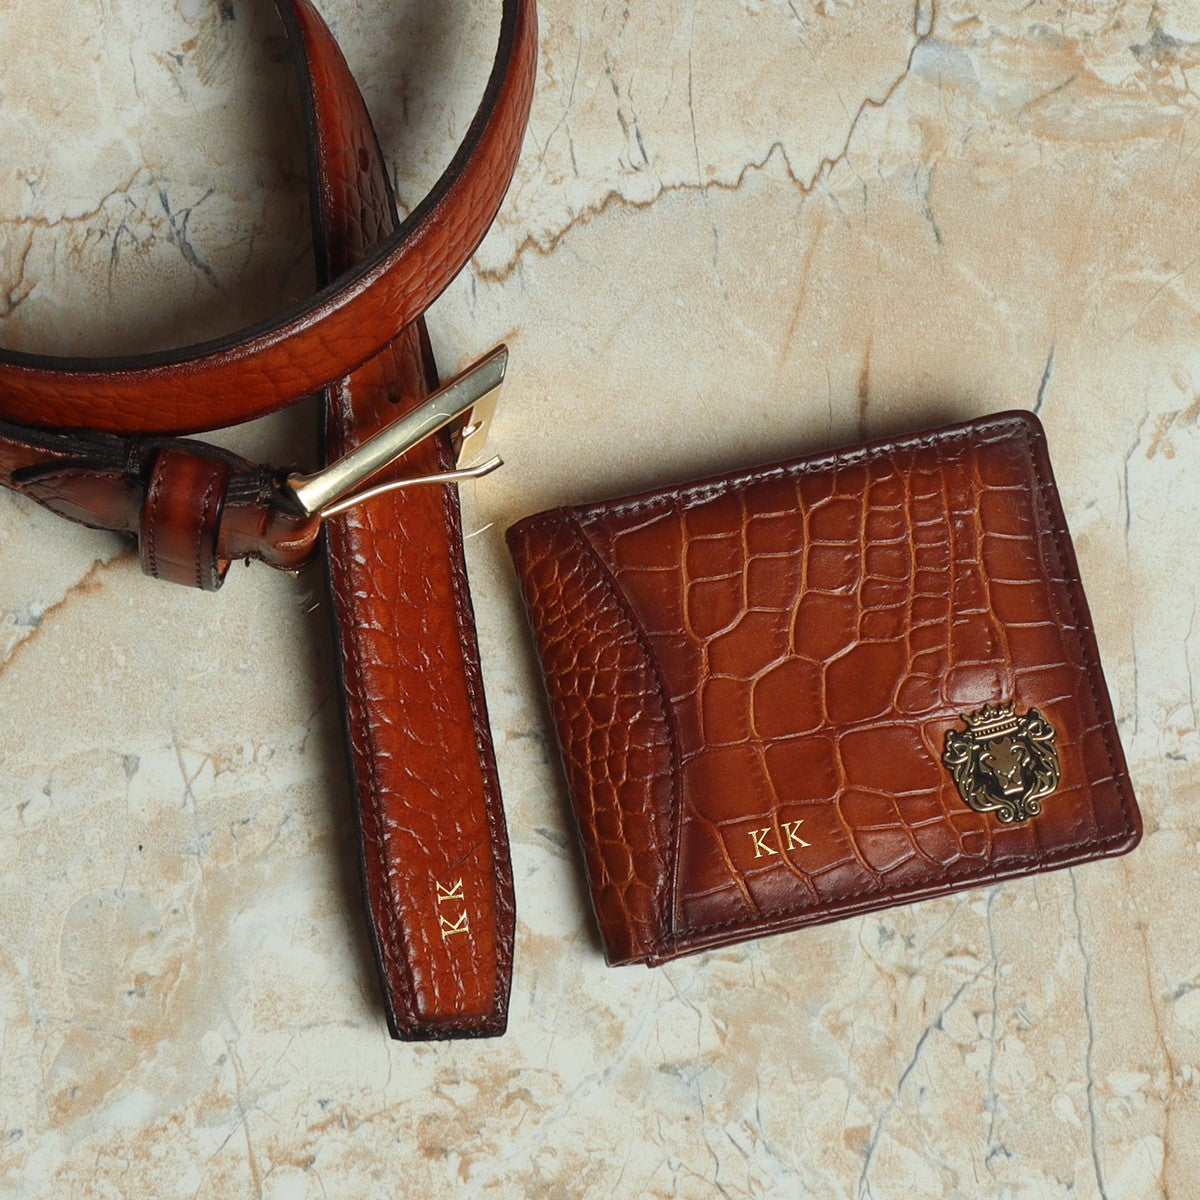 Bespoke Combo of Tan Croco Leather Wallet & Belt with Initial by Brune & Bareskin